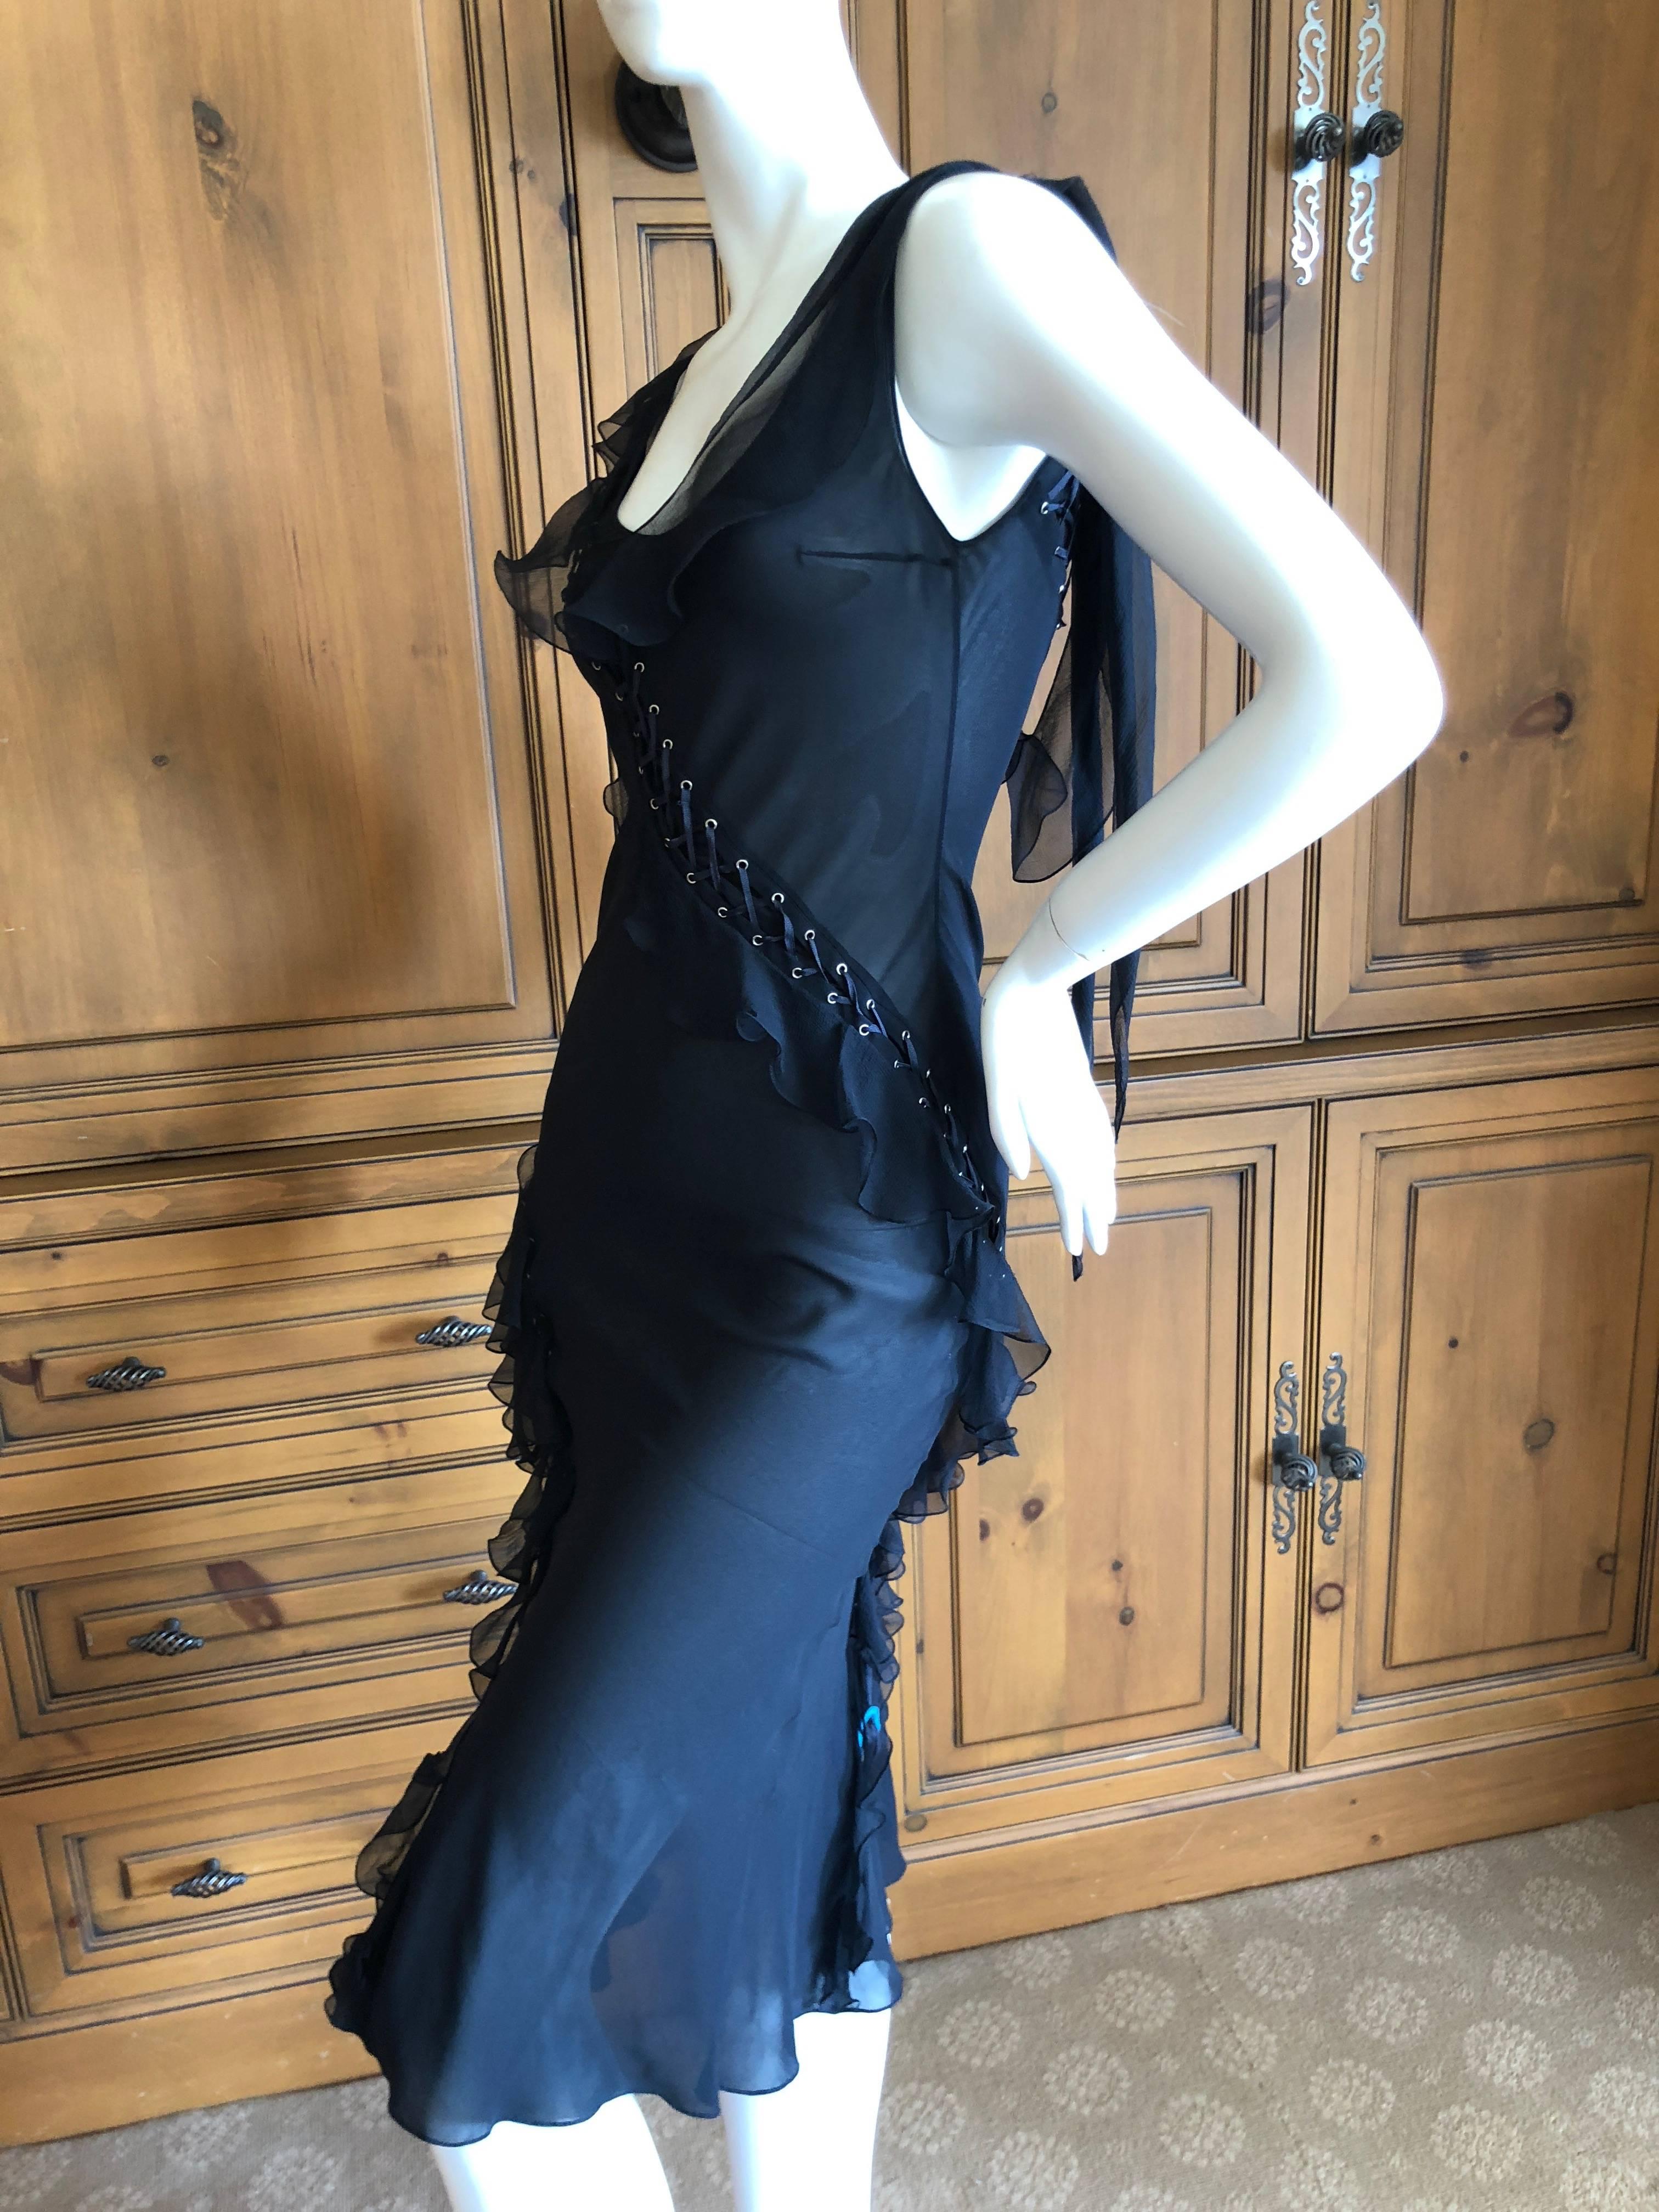 Christian Dior by John Galliano Vintage Sheer Black Dress Corset Lace Up Details 3